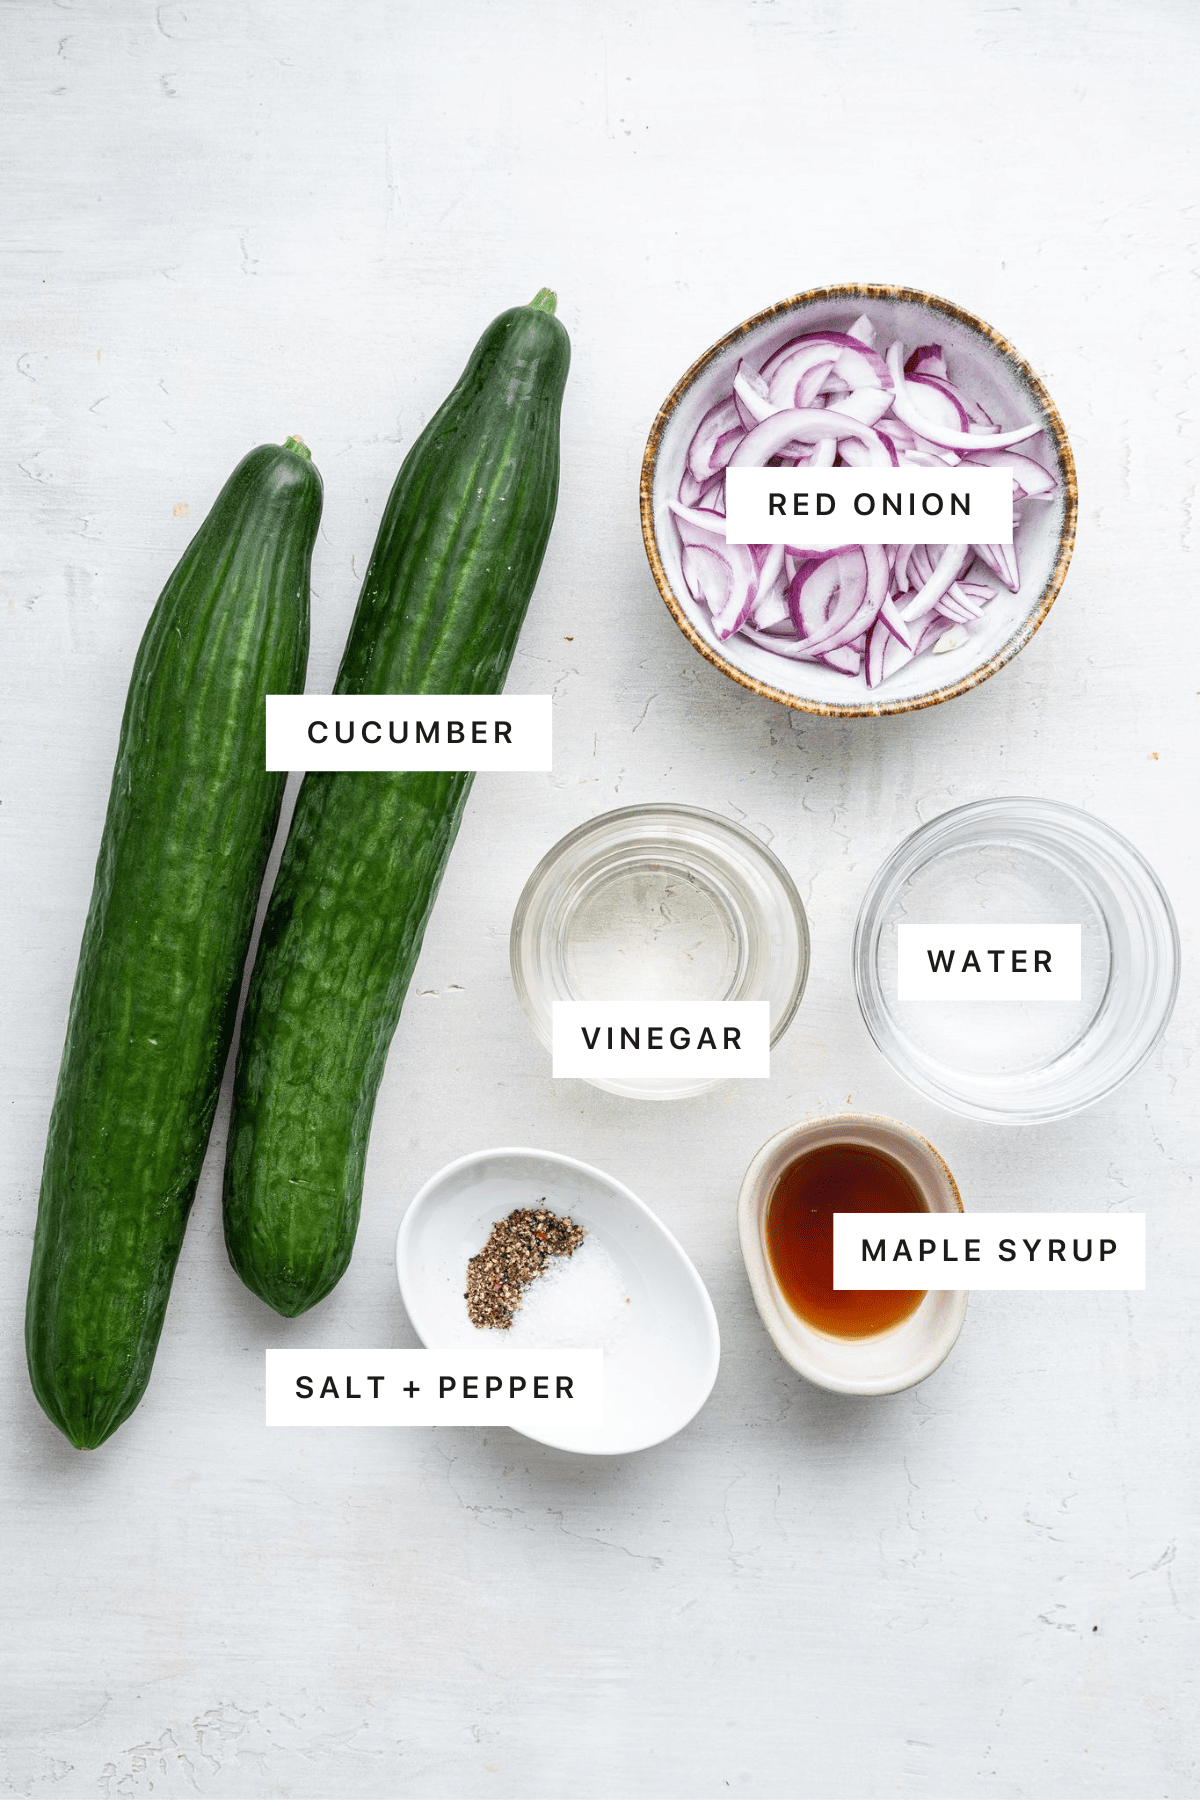 Measured ingredients to make Easy Cucumber Salad: cucumber, red onion, vinegar, water, salt, pepper, and maple syrup.